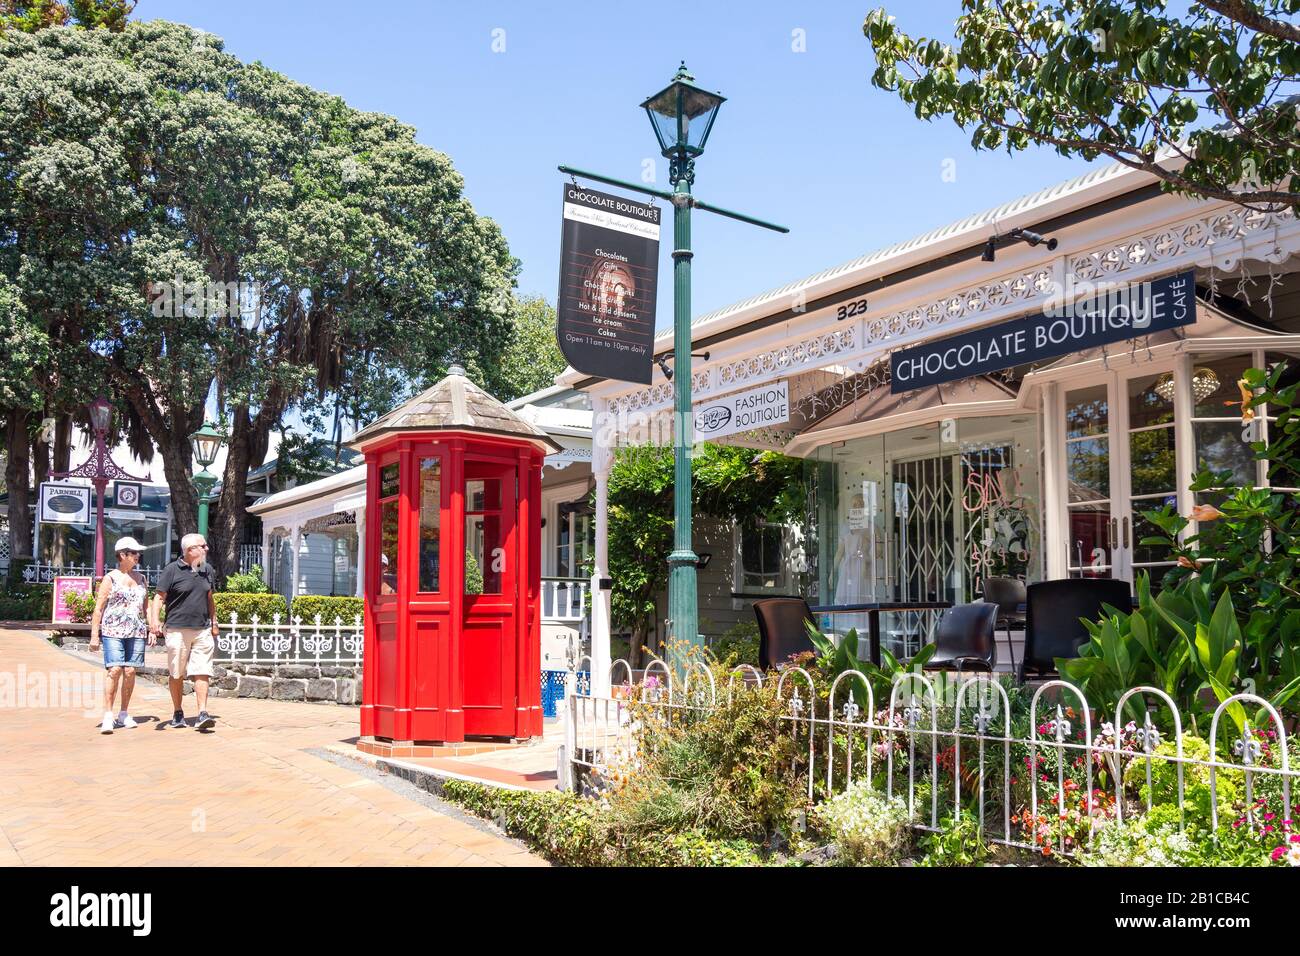 Parnell Village Shops, Parnell Road, Parnell, Auckland, Auckland Region, New Zealand Stock Photo